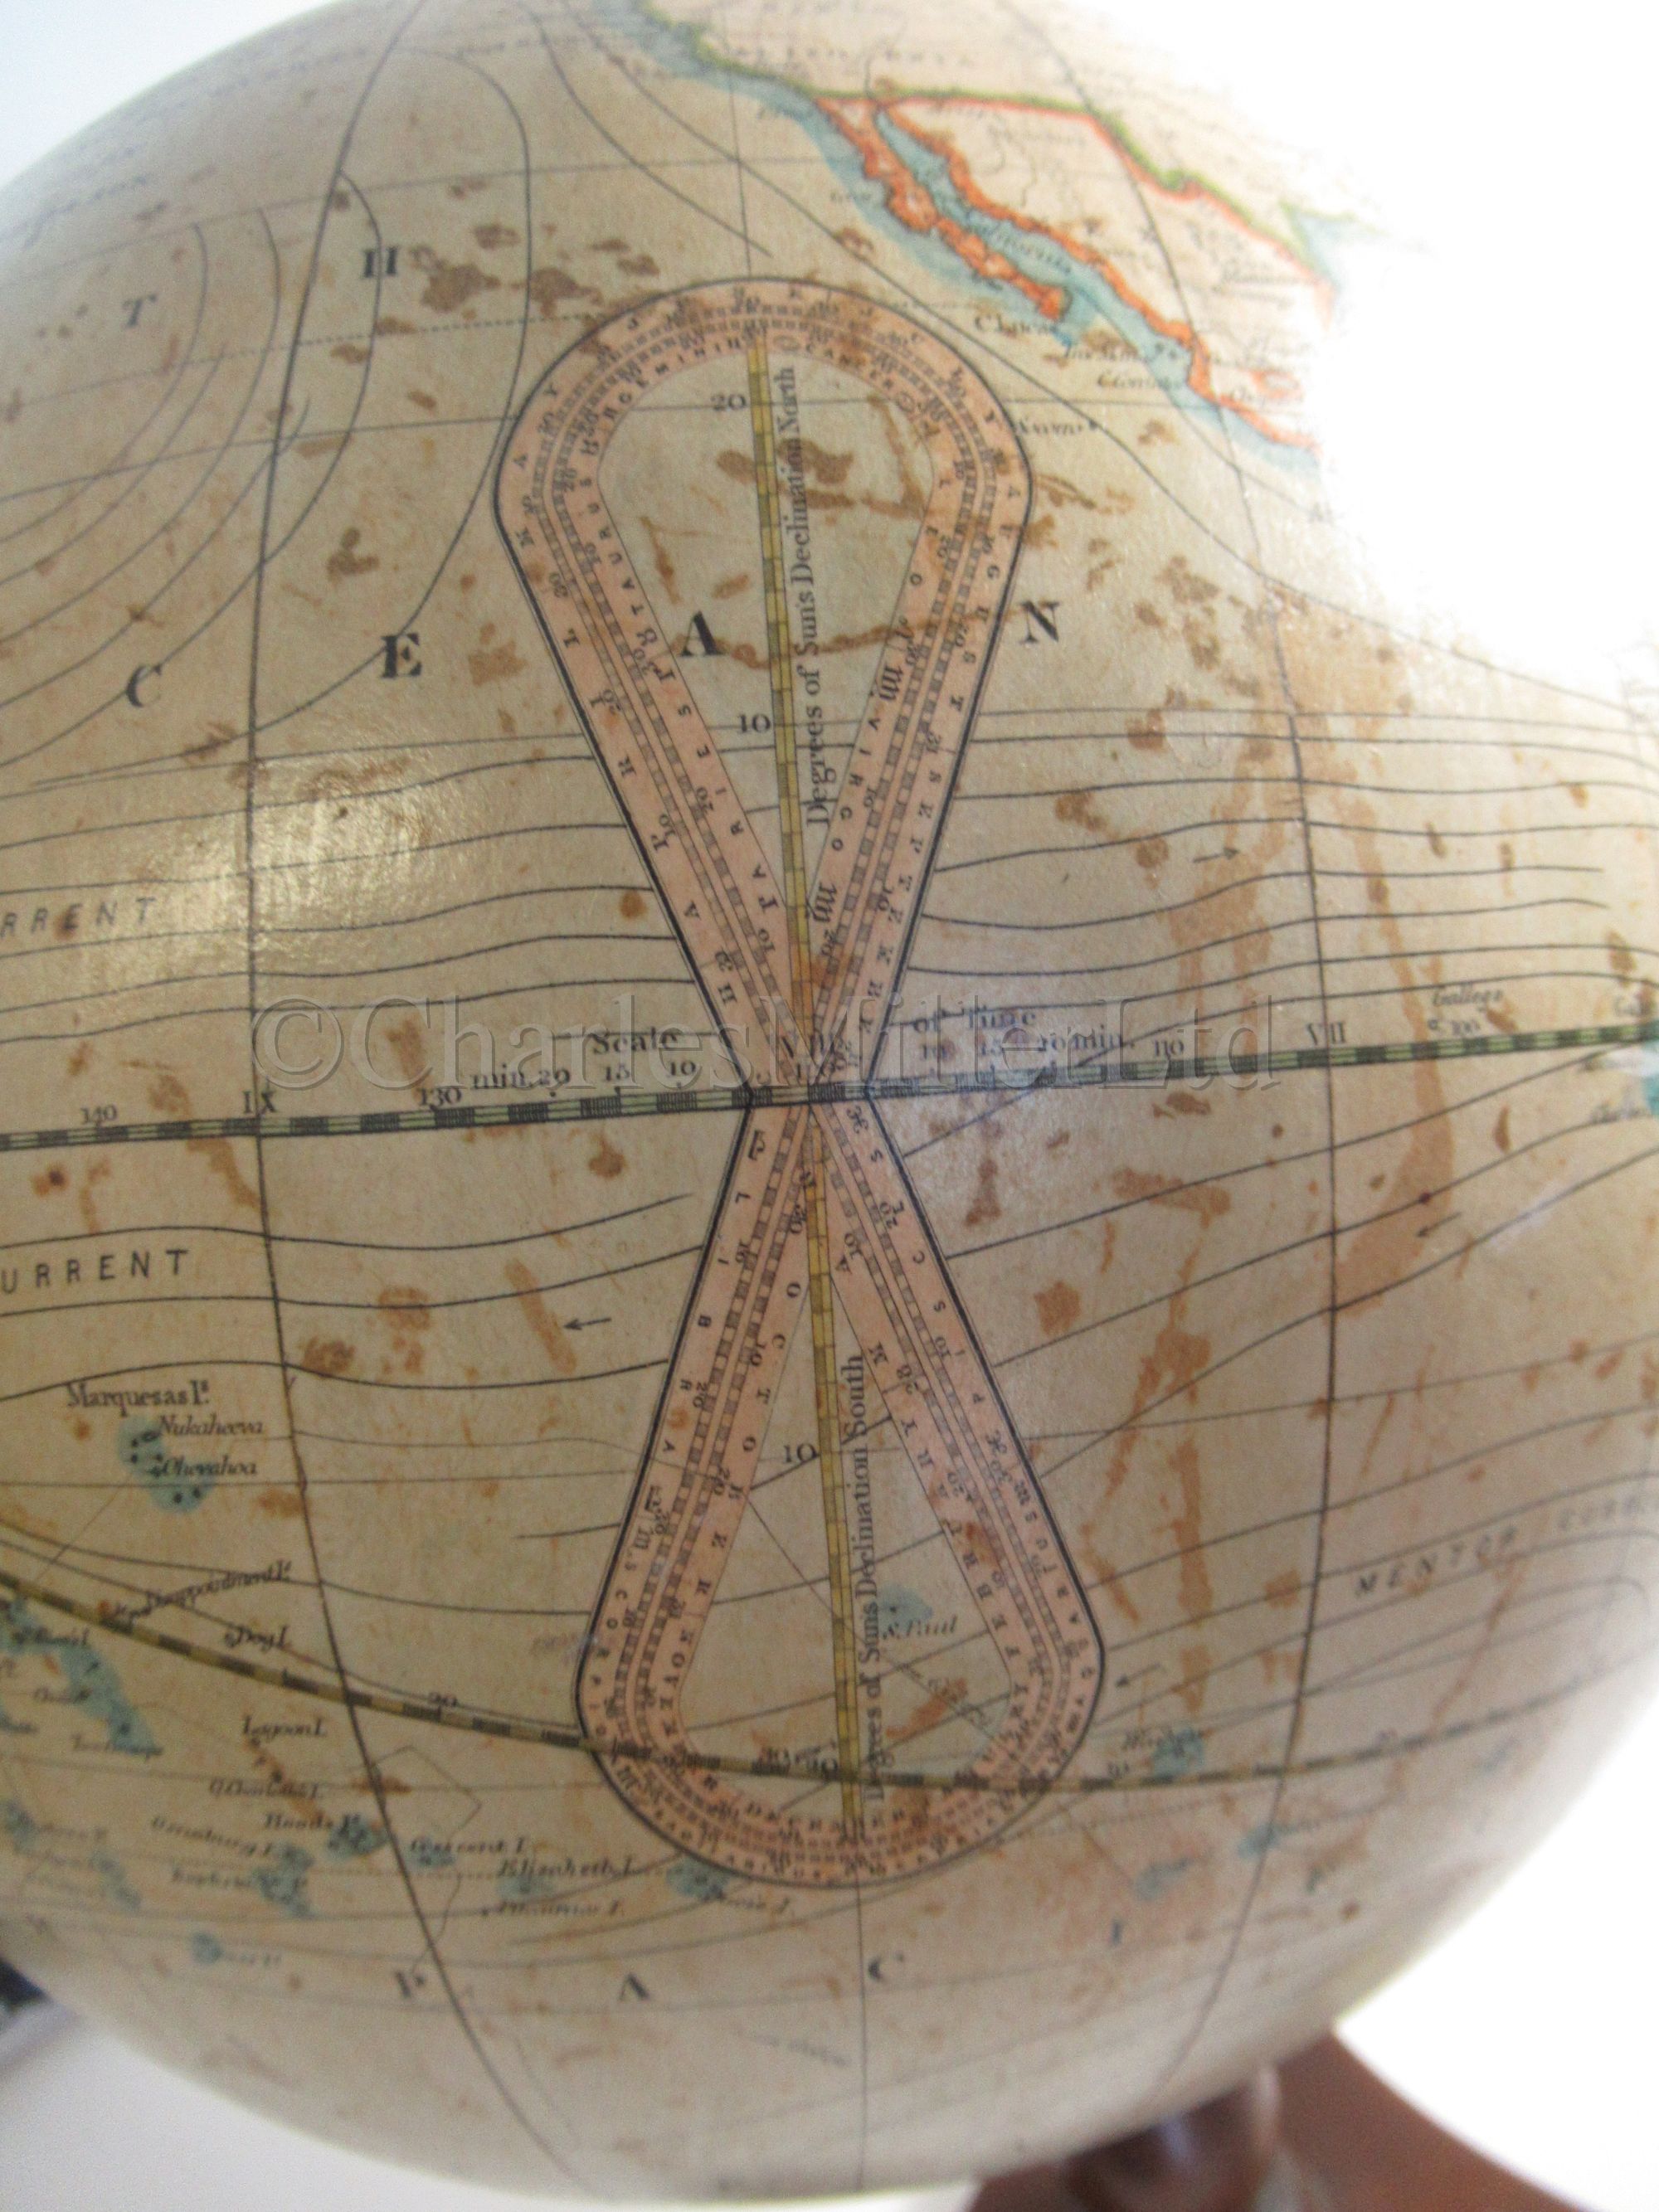 A 10IN. TERRESTRIAL GLOBE BY C. SMITH & SON, LONDON. CIRCA 1890 - Image 6 of 12